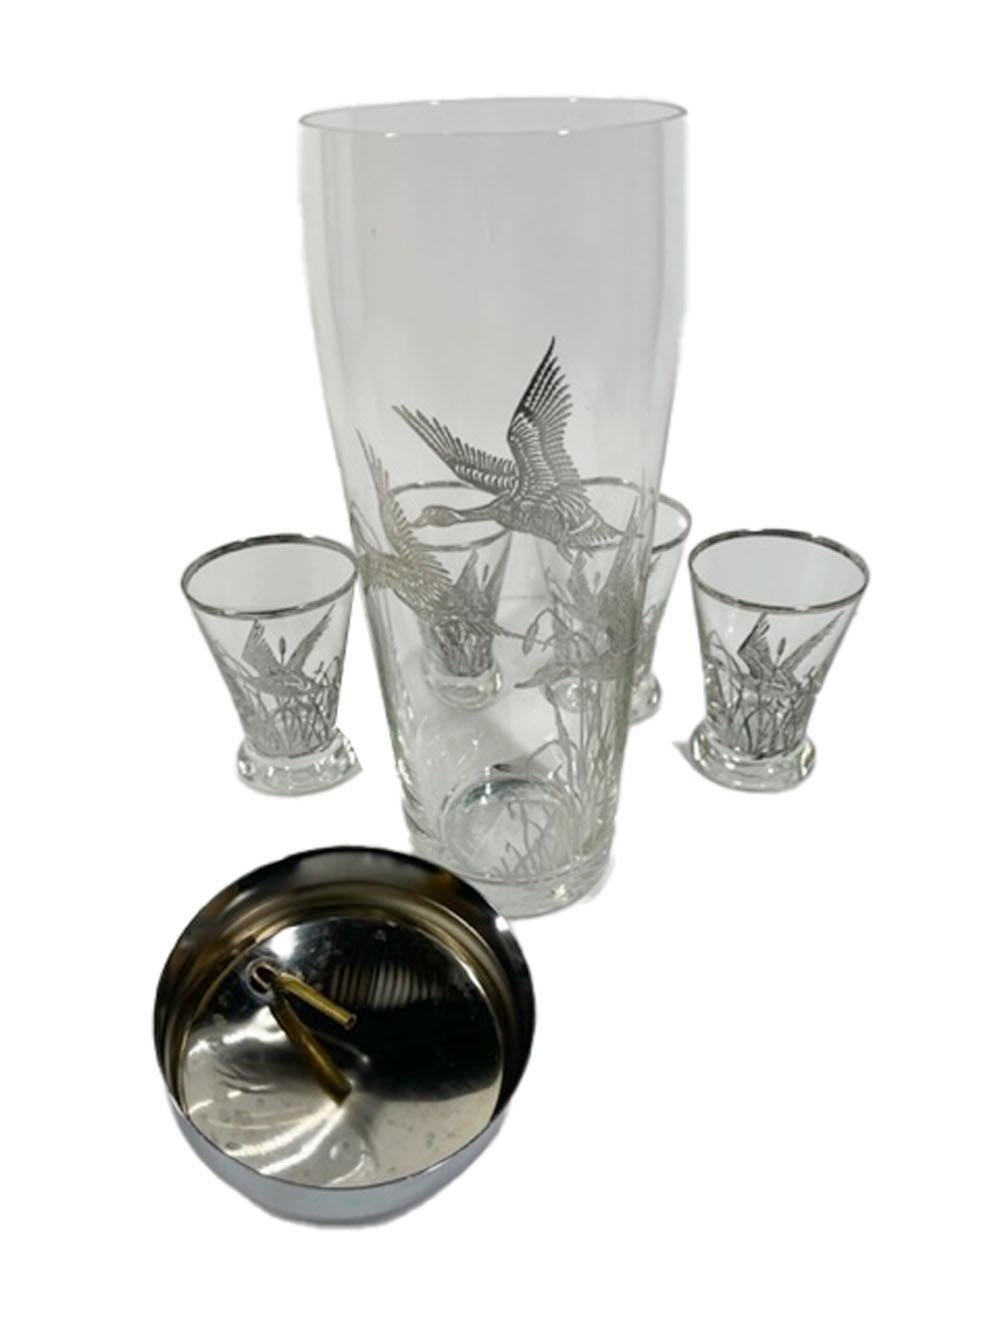 Mid-Century modern cocktail shaker and 4 cocktail glasses in clear glass with a silver overlaid design of three ducks in flight among cattails and the shaker with chrome lid.